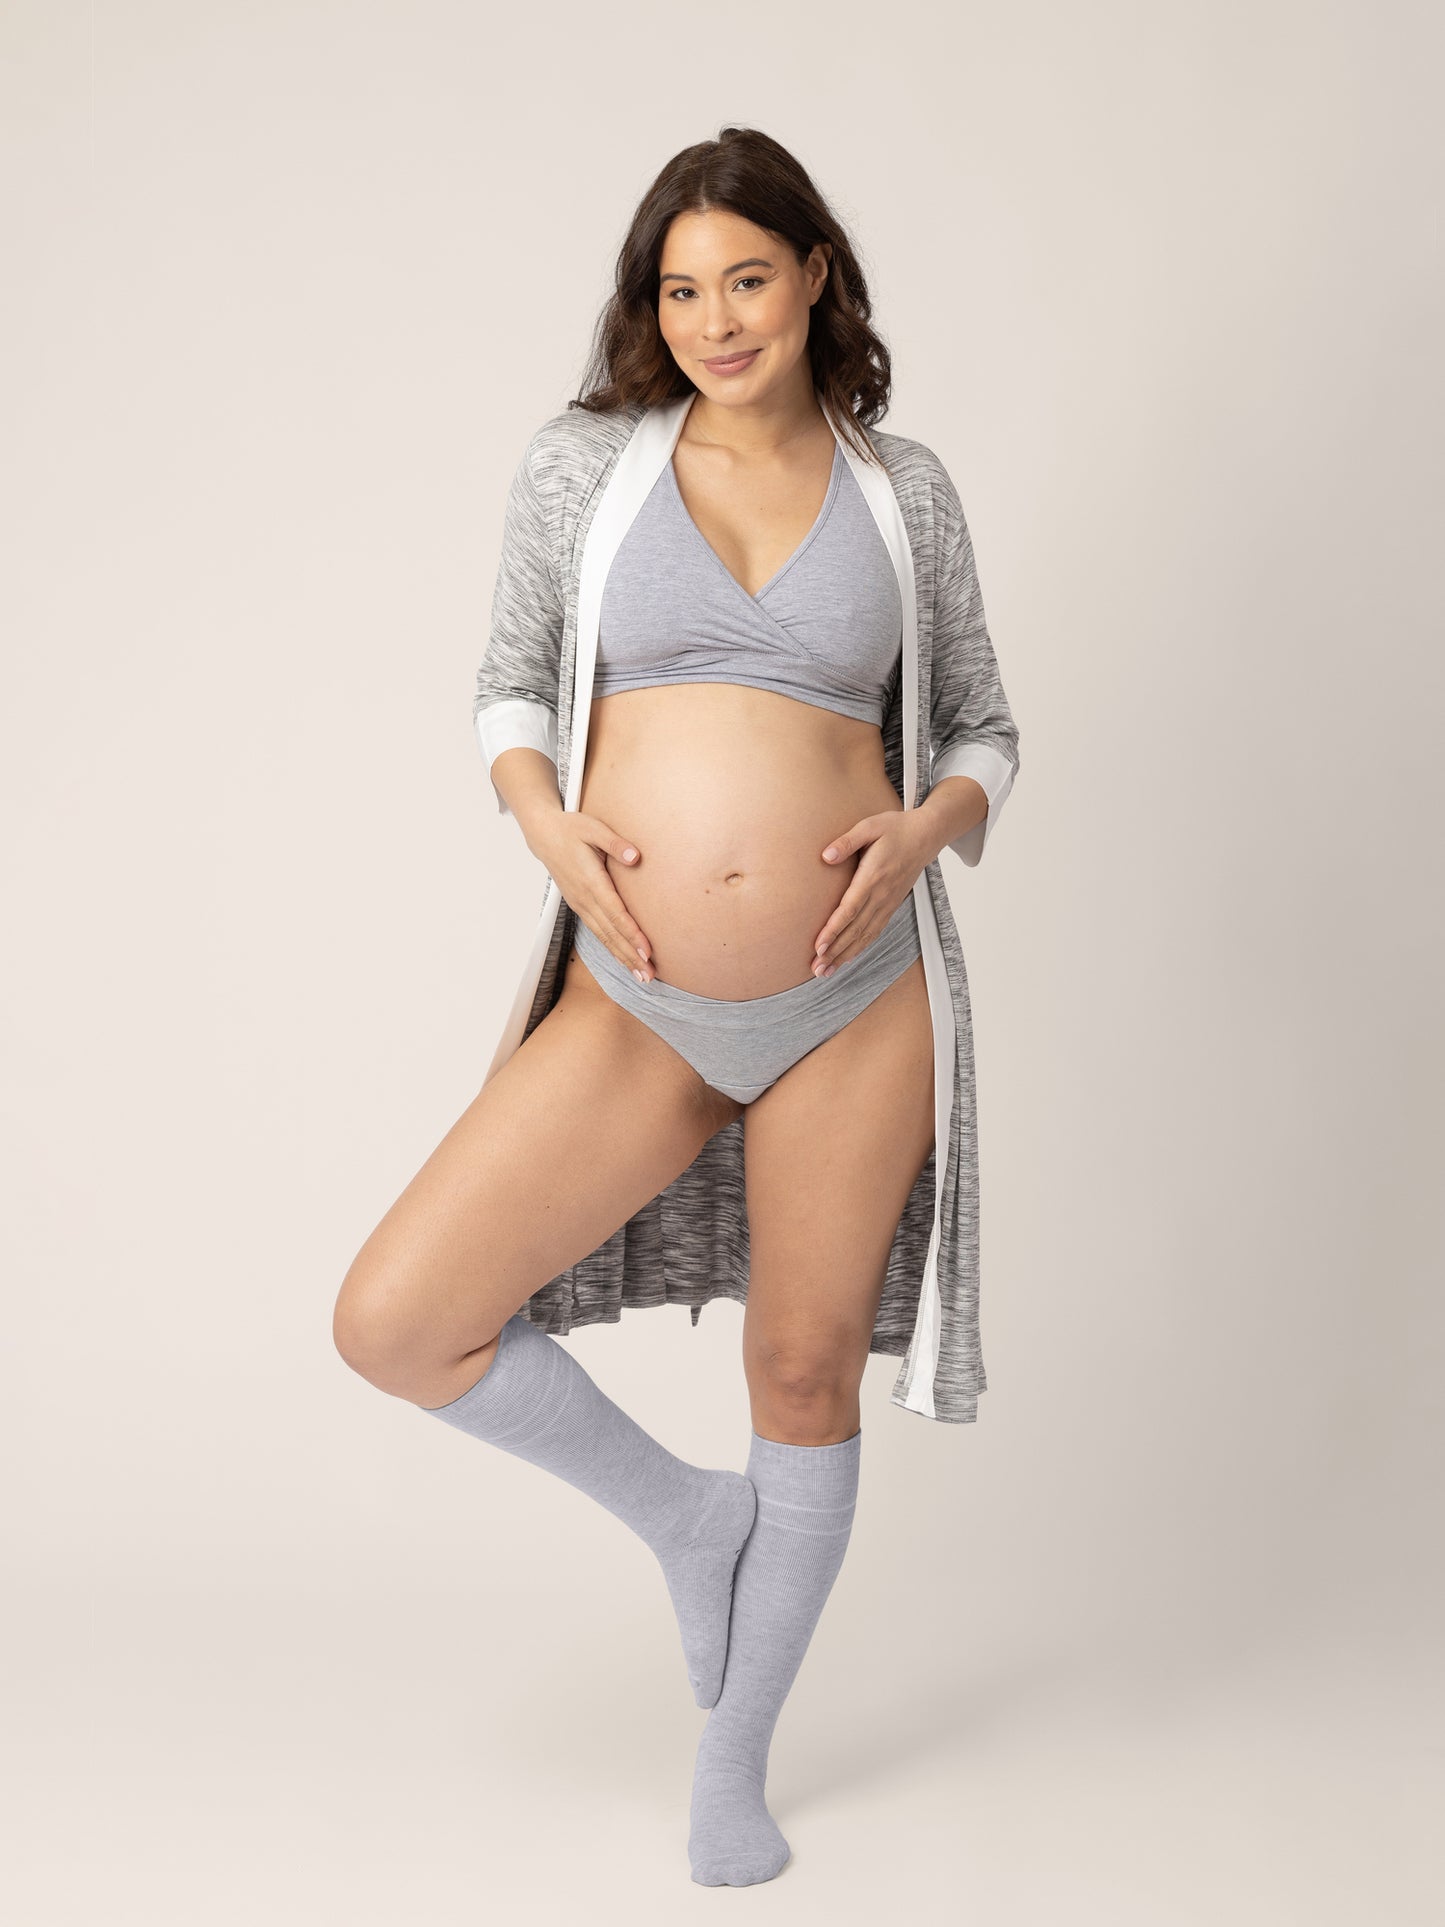 Women Maternity Compression Leggings Over The Belly Full Length